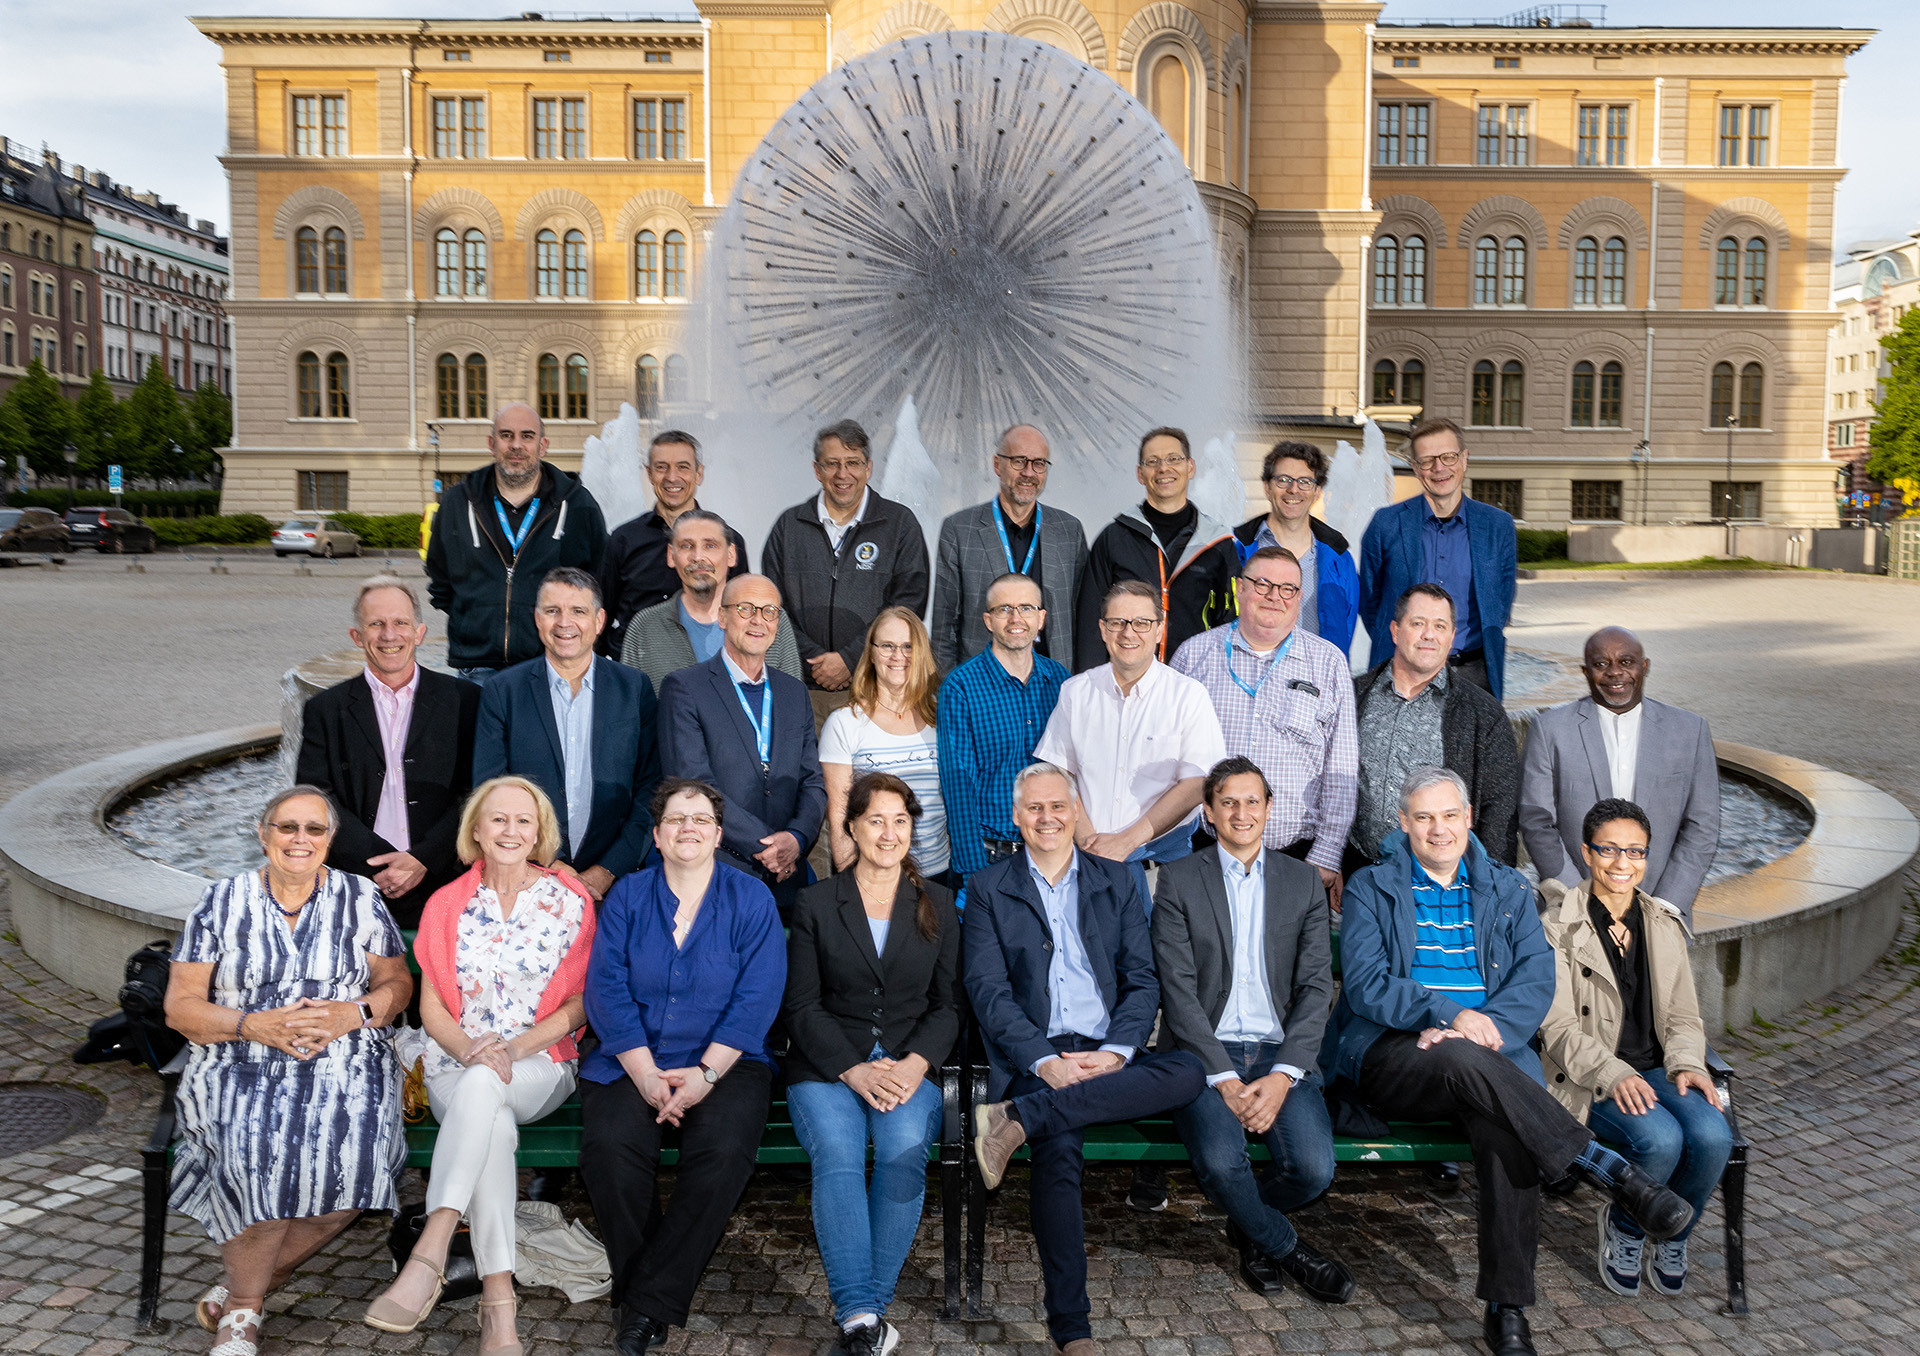 The EAFS 2022 Scientific Committee. Photo by Marcus Andrae